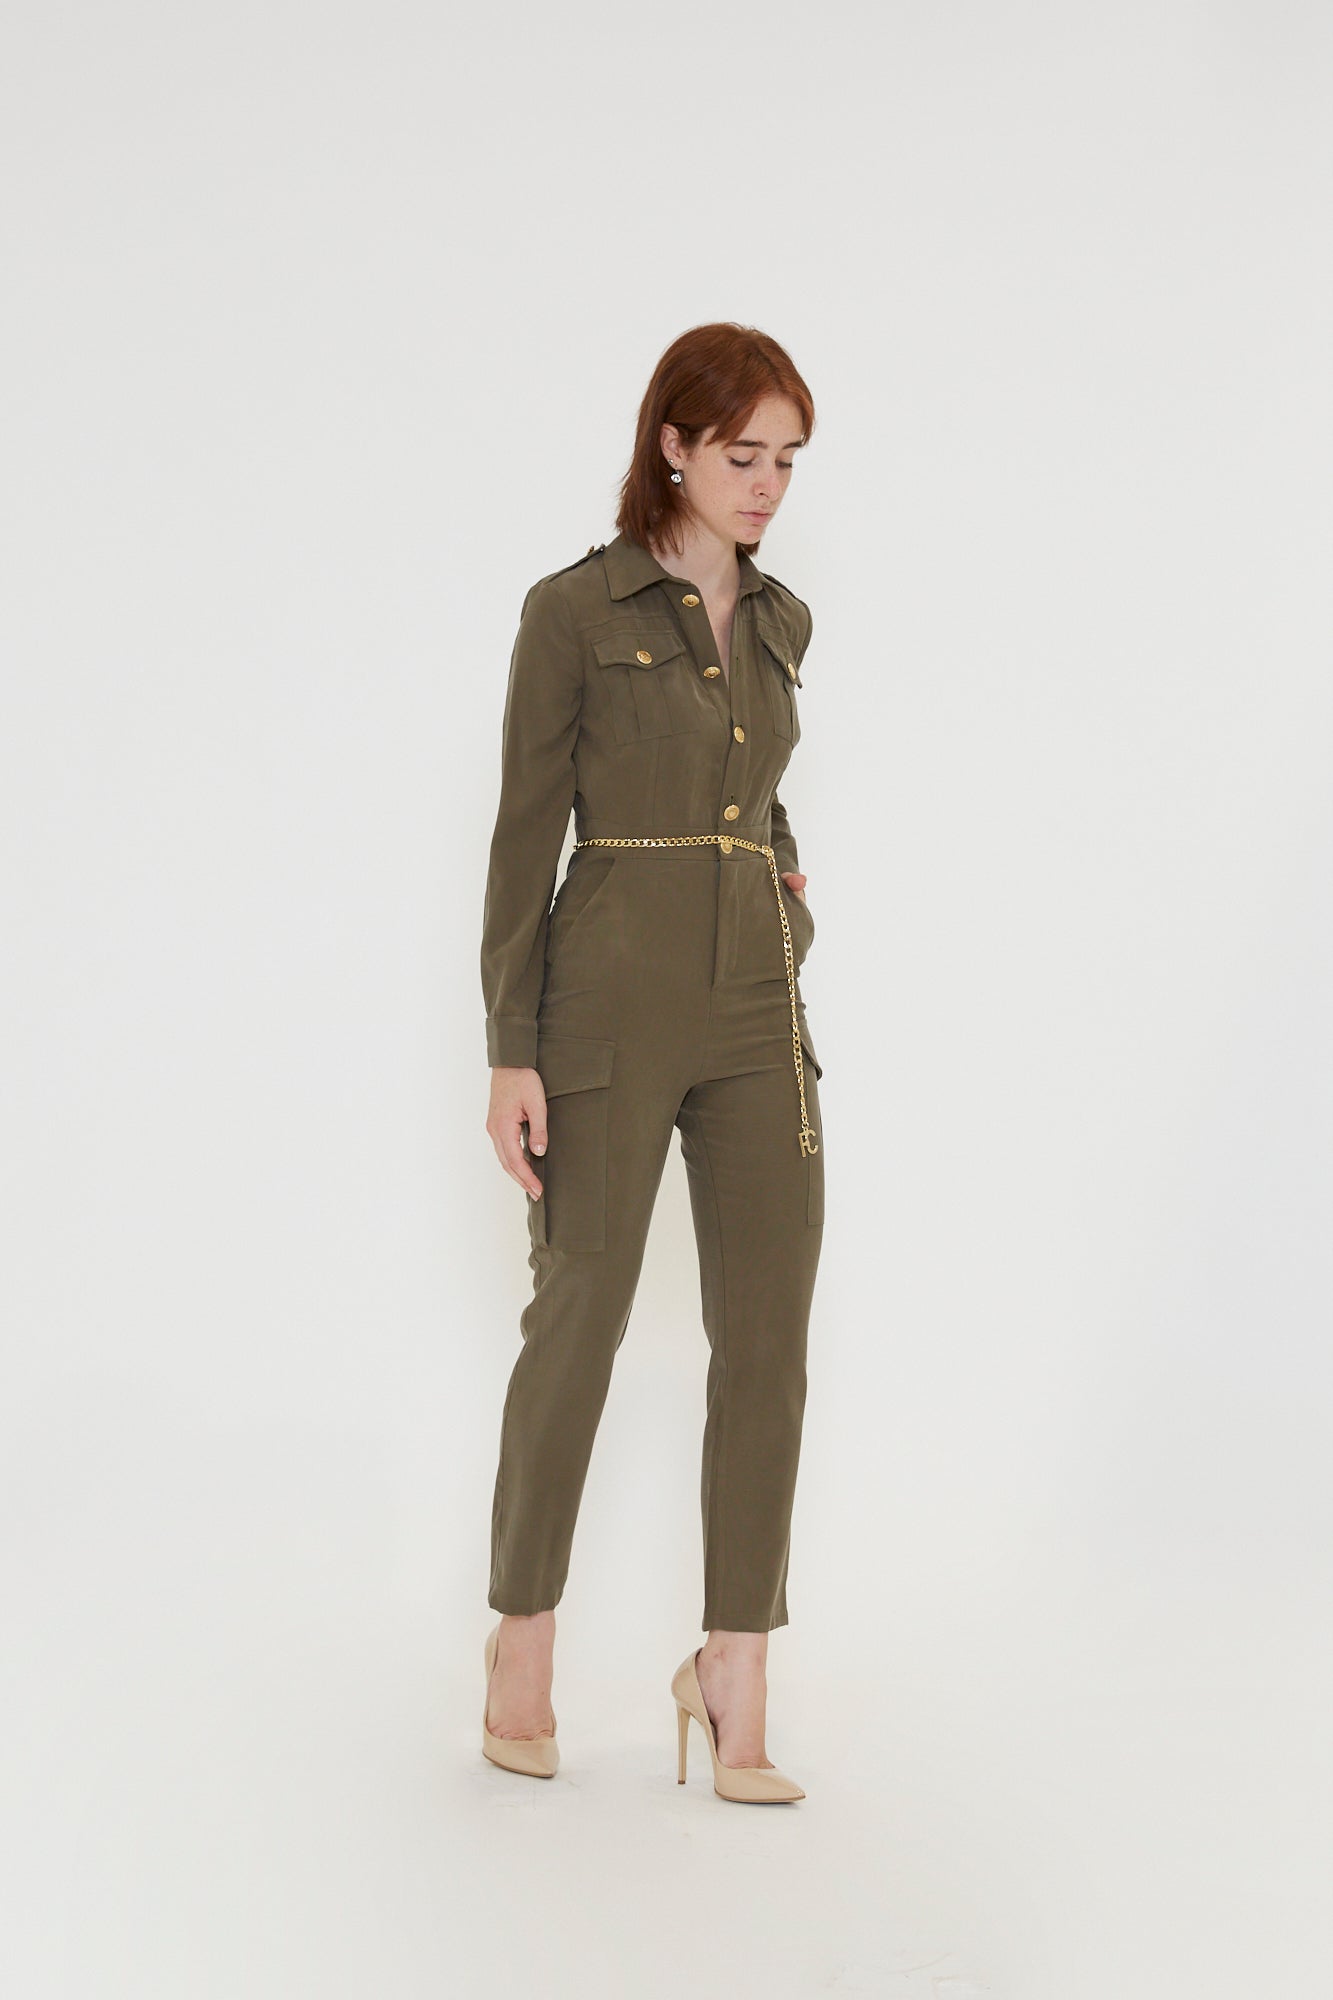 Military Penelope suit